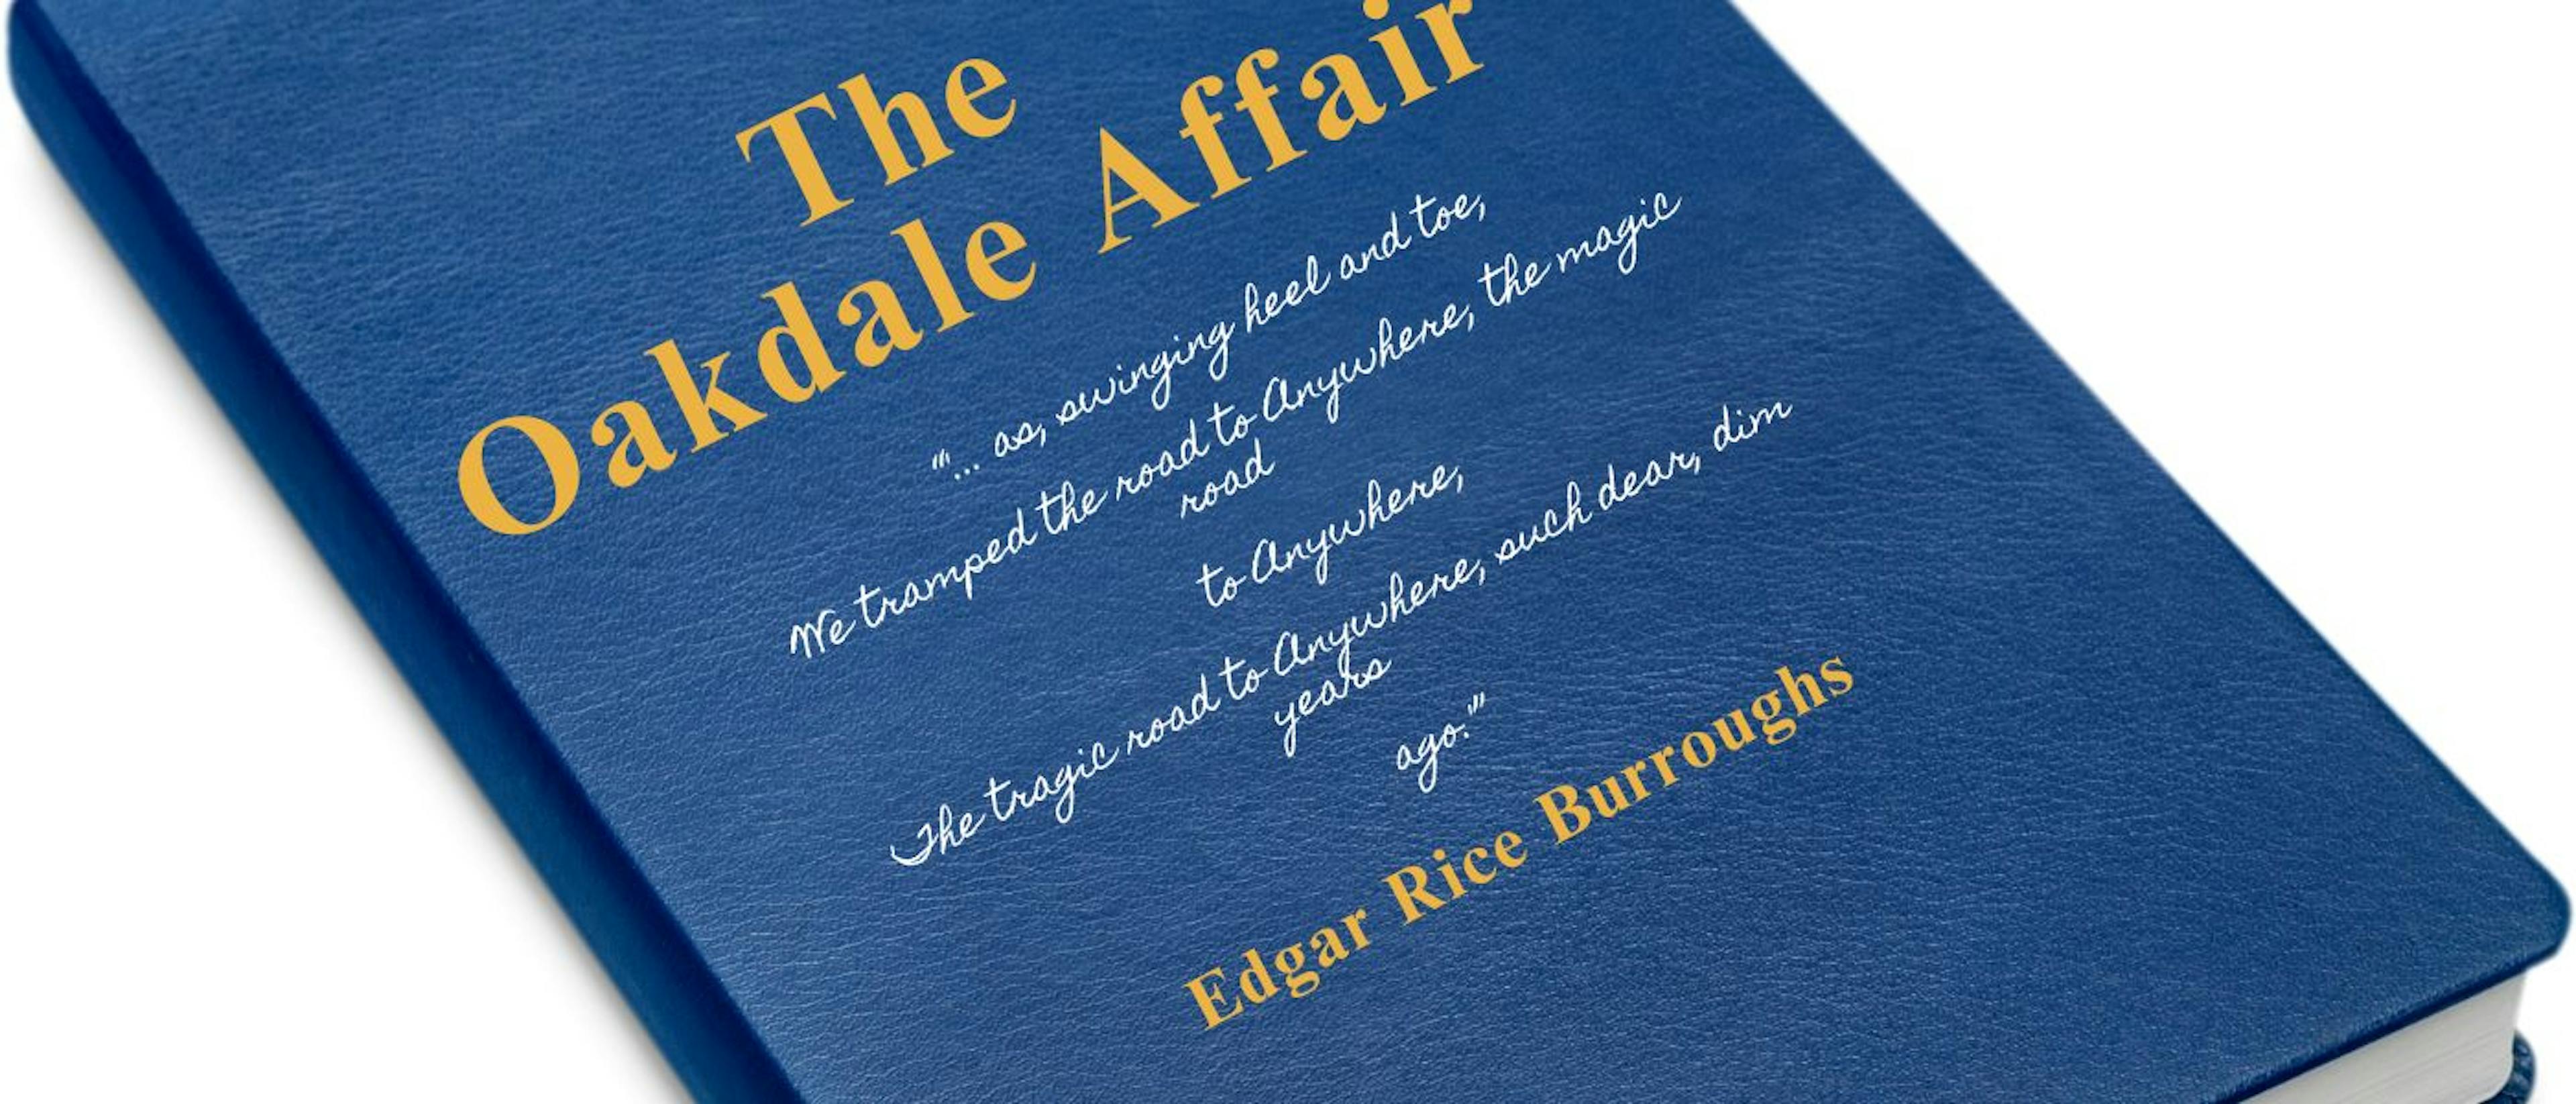 featured image - The Oakdale Affair by Edgar Rice Burroughs - Table of Links